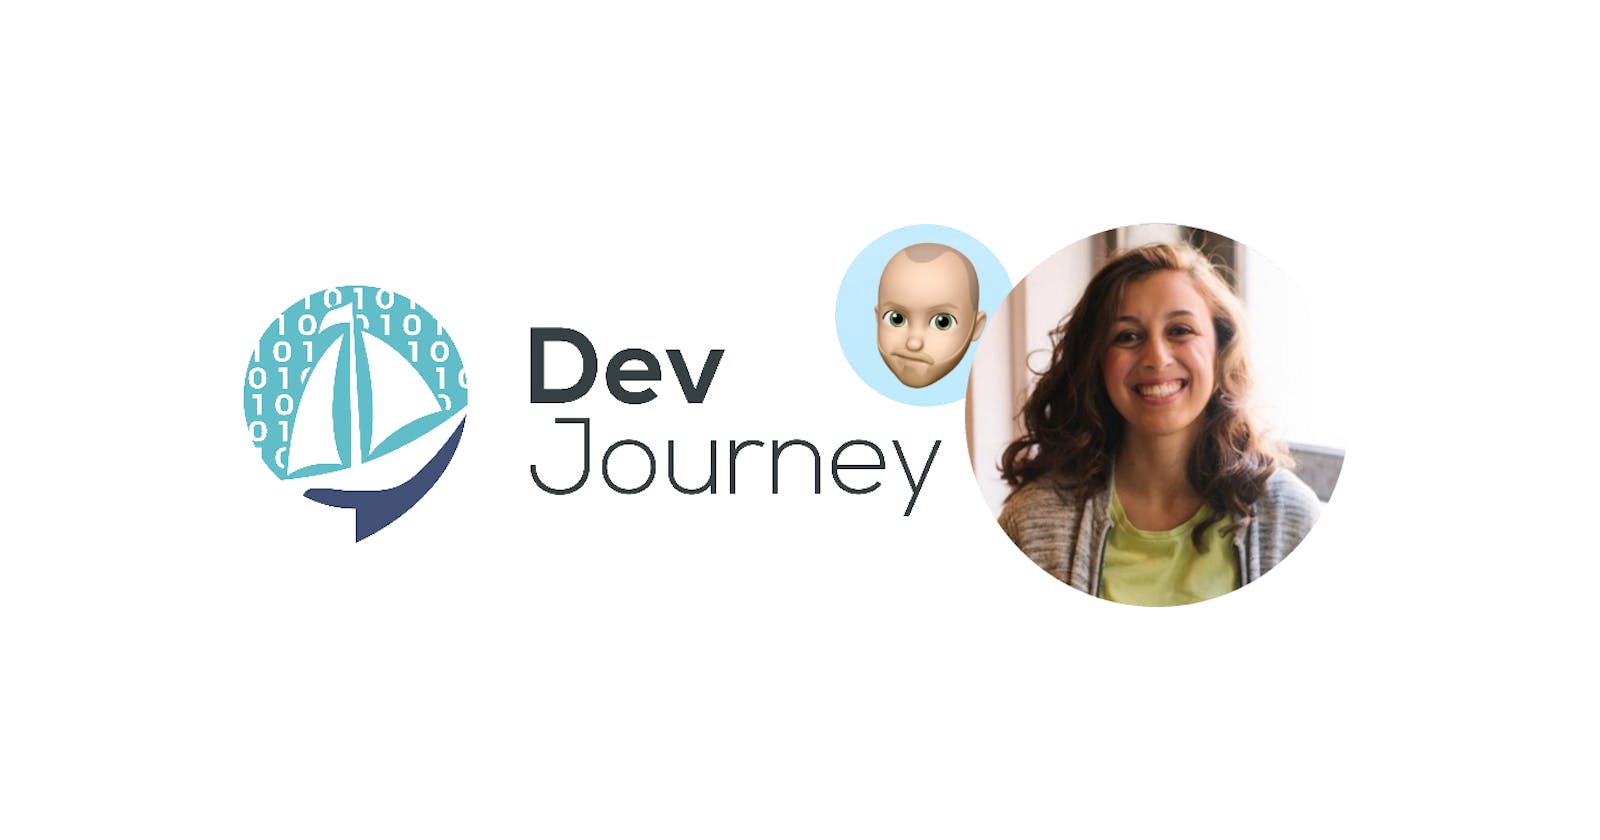 Cassidy Williams at the core of developer experience... and other things I learned recording her DevJourney